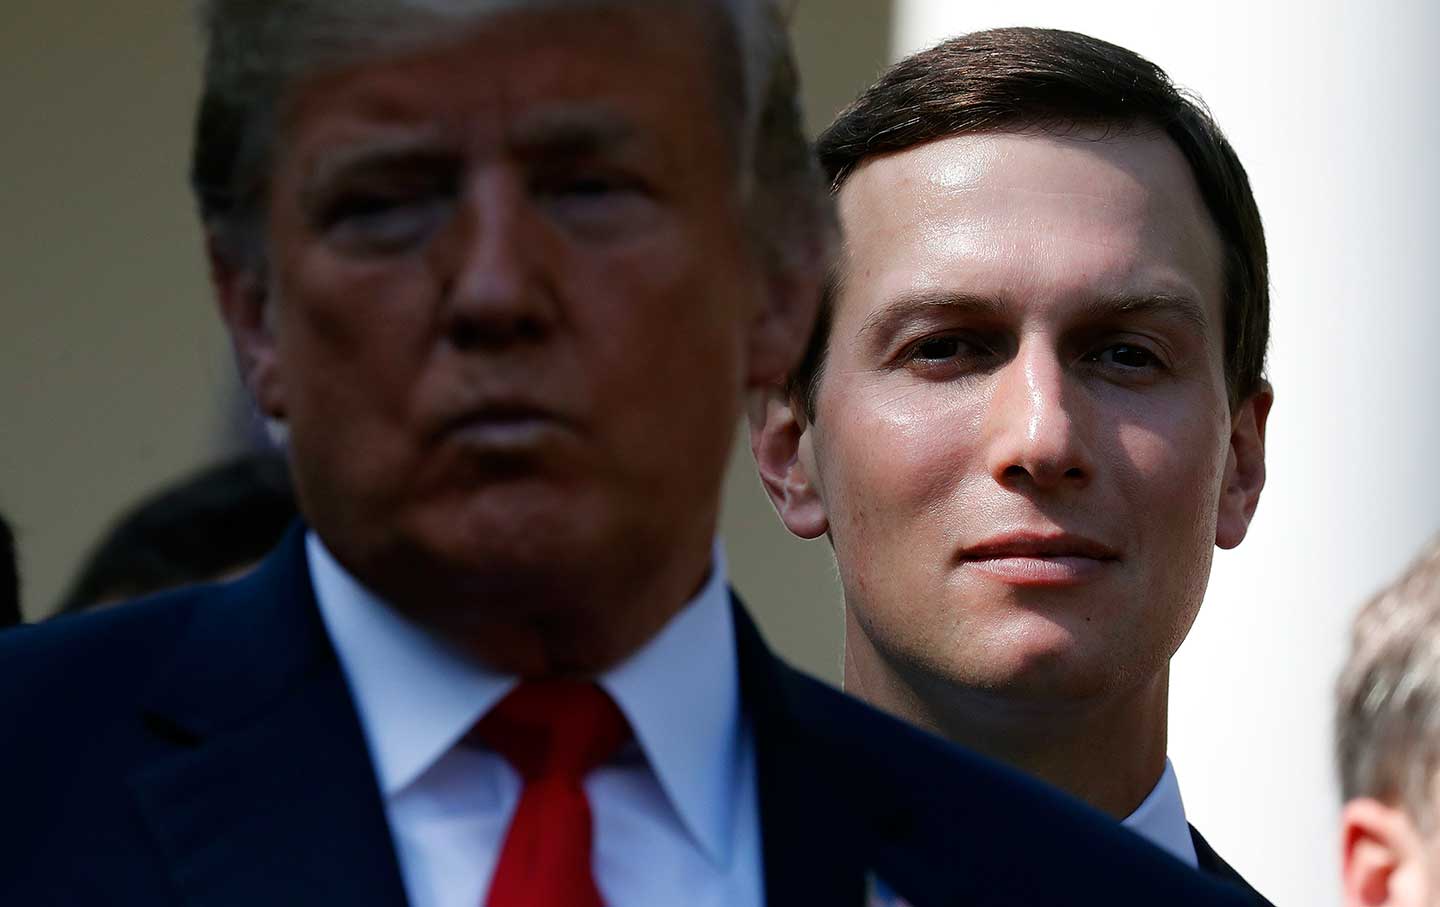 Trump’s Justification for Giving His Son-in-Law a Security Clearance